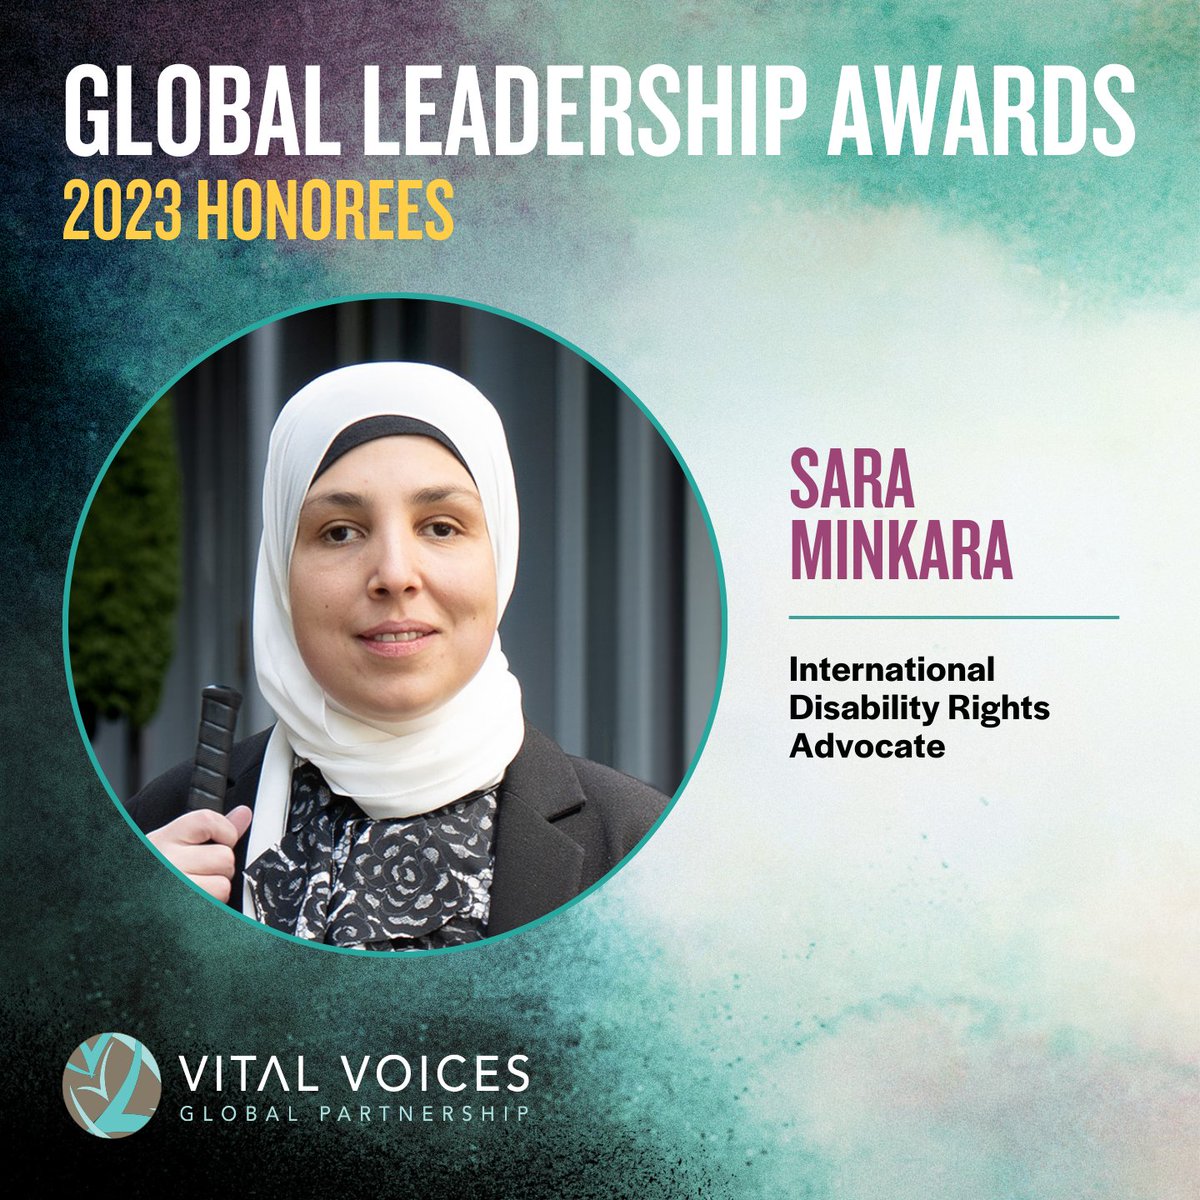 Congratulations to Global Leadership Award Honoree U.S. Special Advisor Sara Minkara! Minkara is a pioneering advocate for inclusivity and the rights of people with disabilities. Watch Sara's honoree film here: youtu.be/BgHIE3N2vOE?si… #globalleadershipawards #powerofpossible